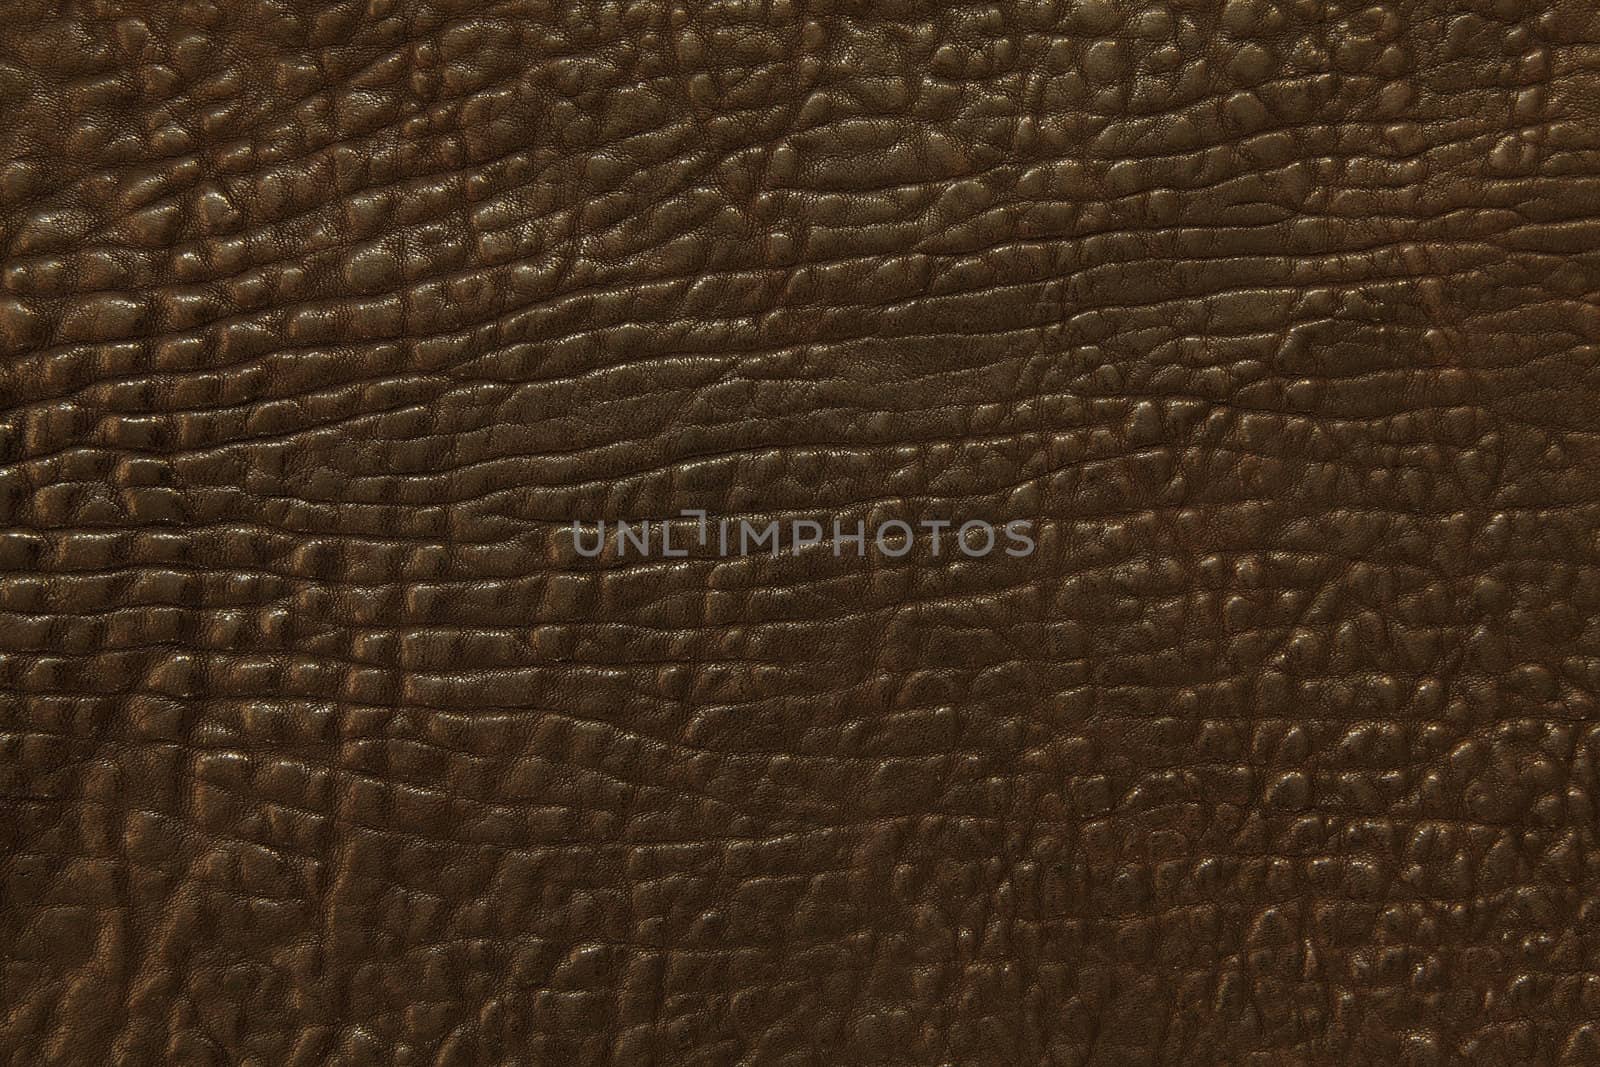 Closeup photo of dark brown leather as a background.